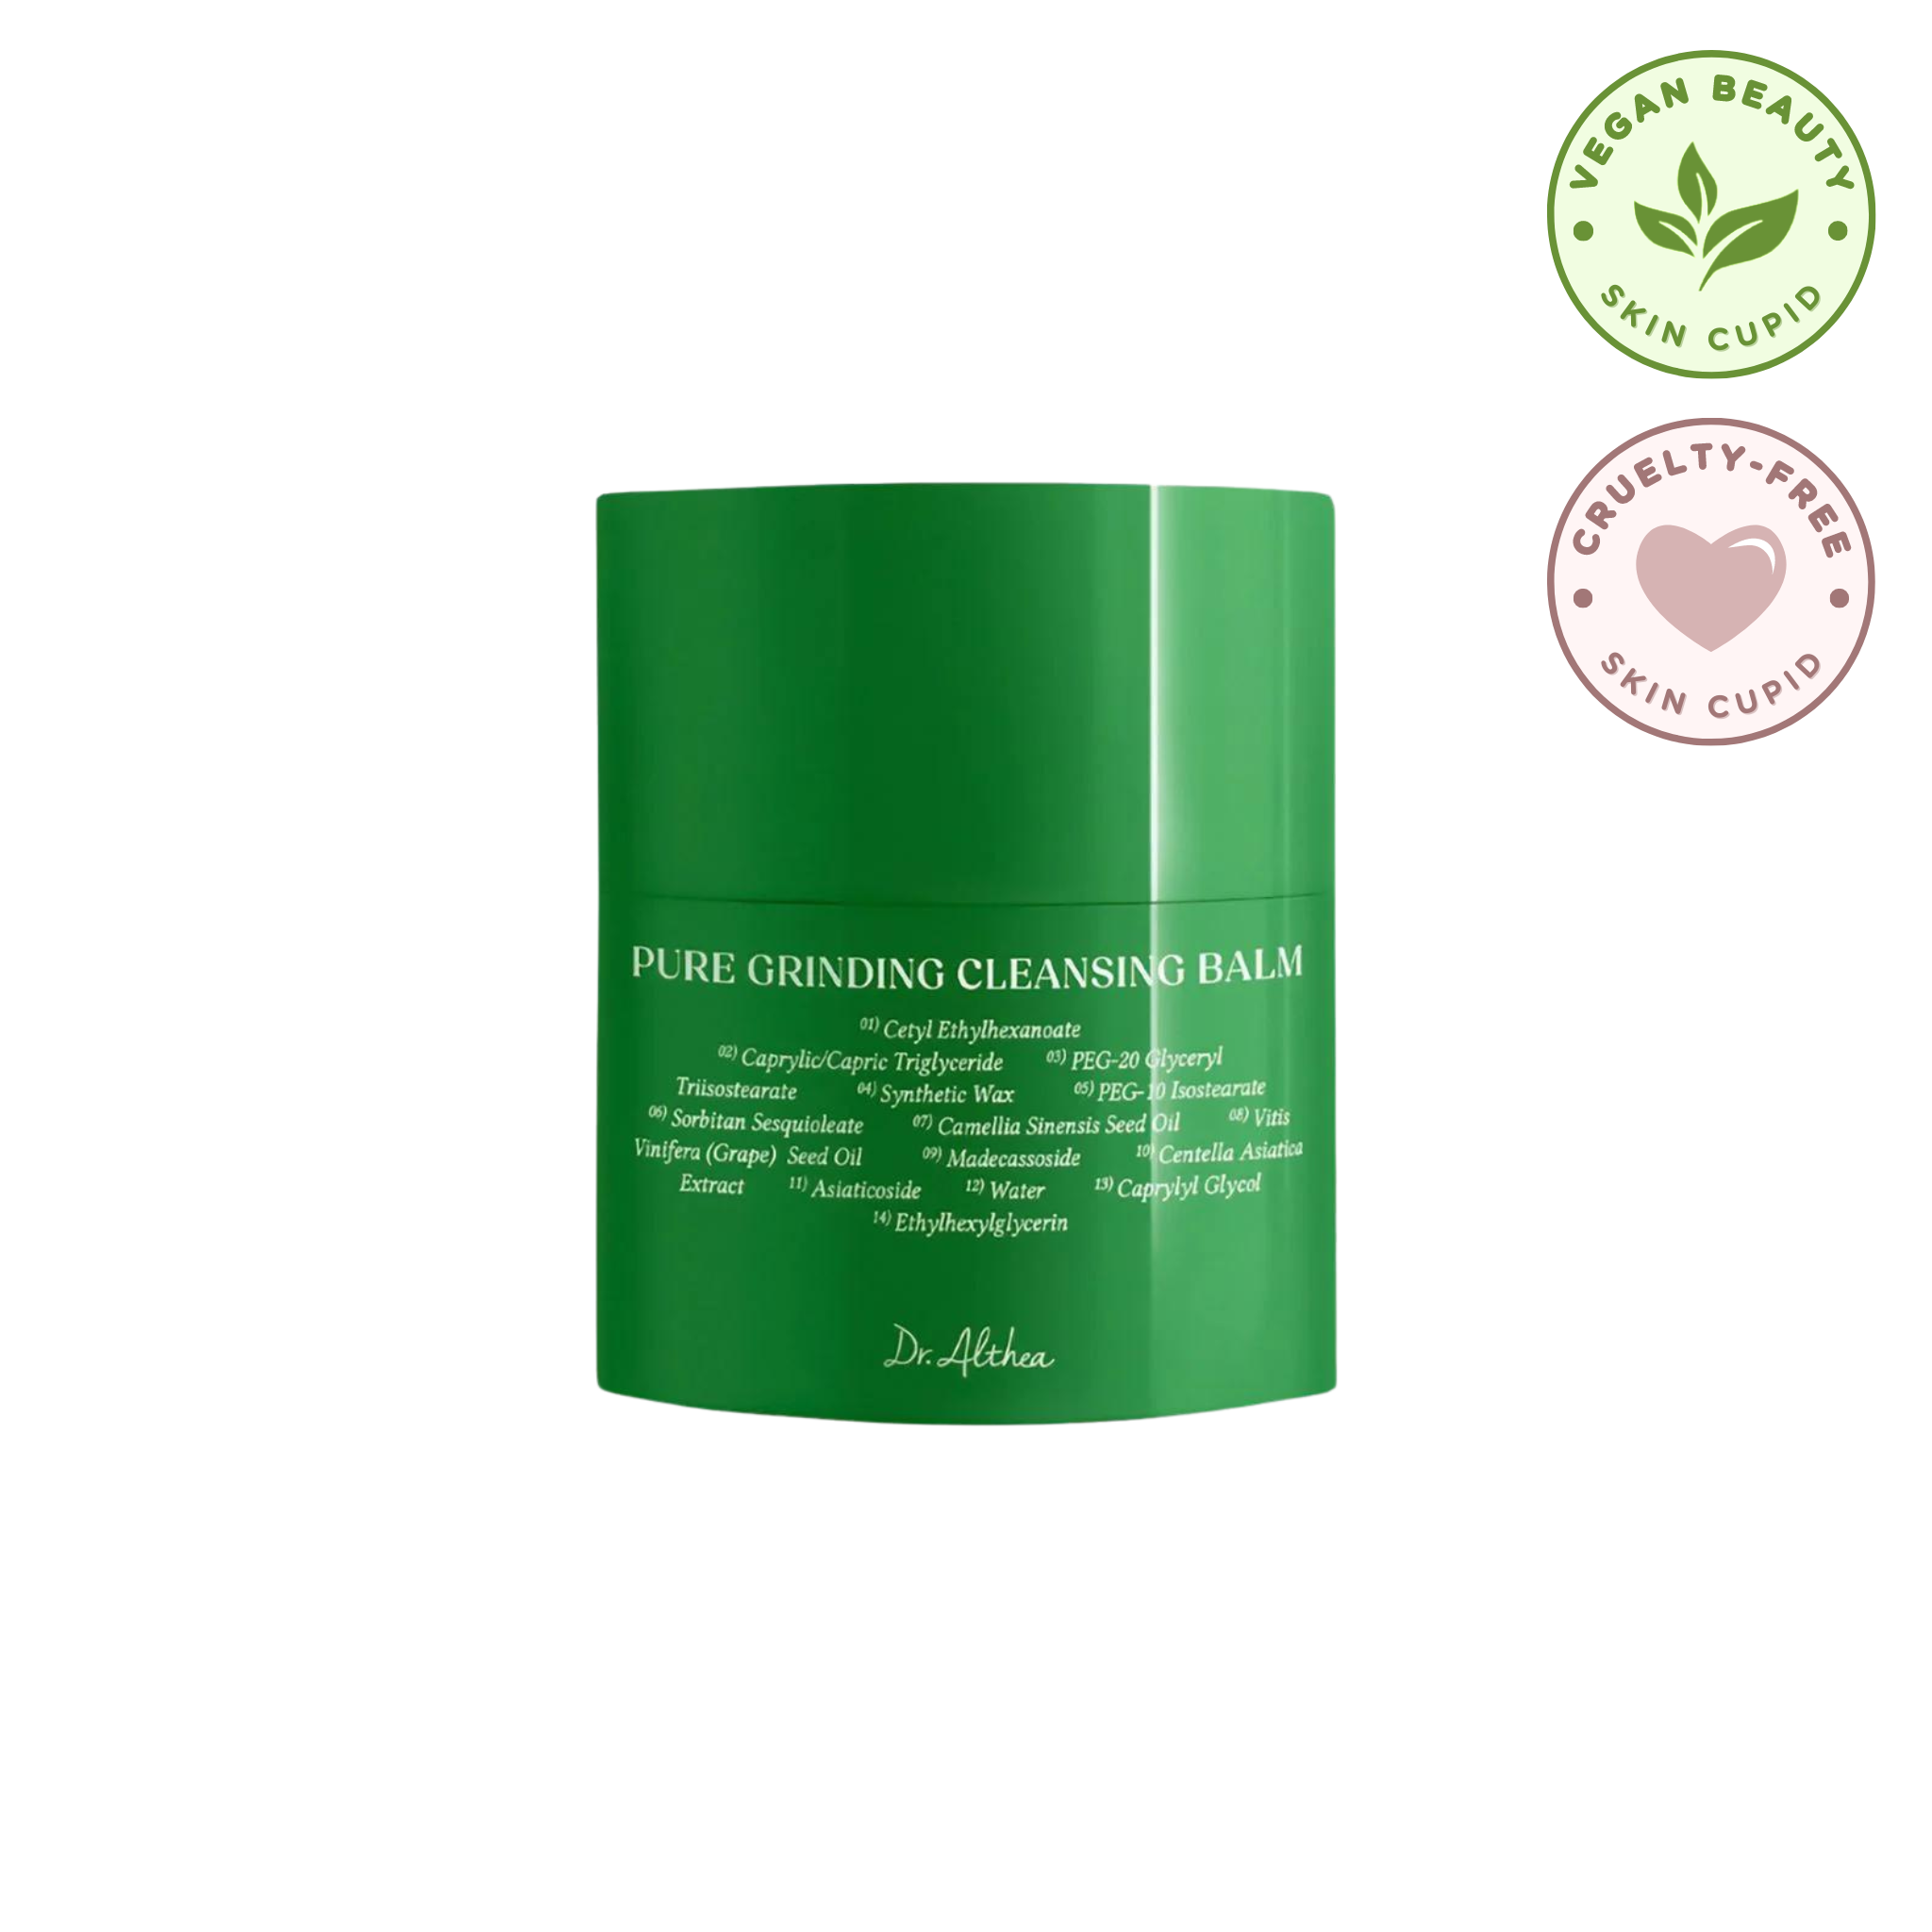 DR. ALTHEA Pure Grinding Cleansing Balm (50ml)